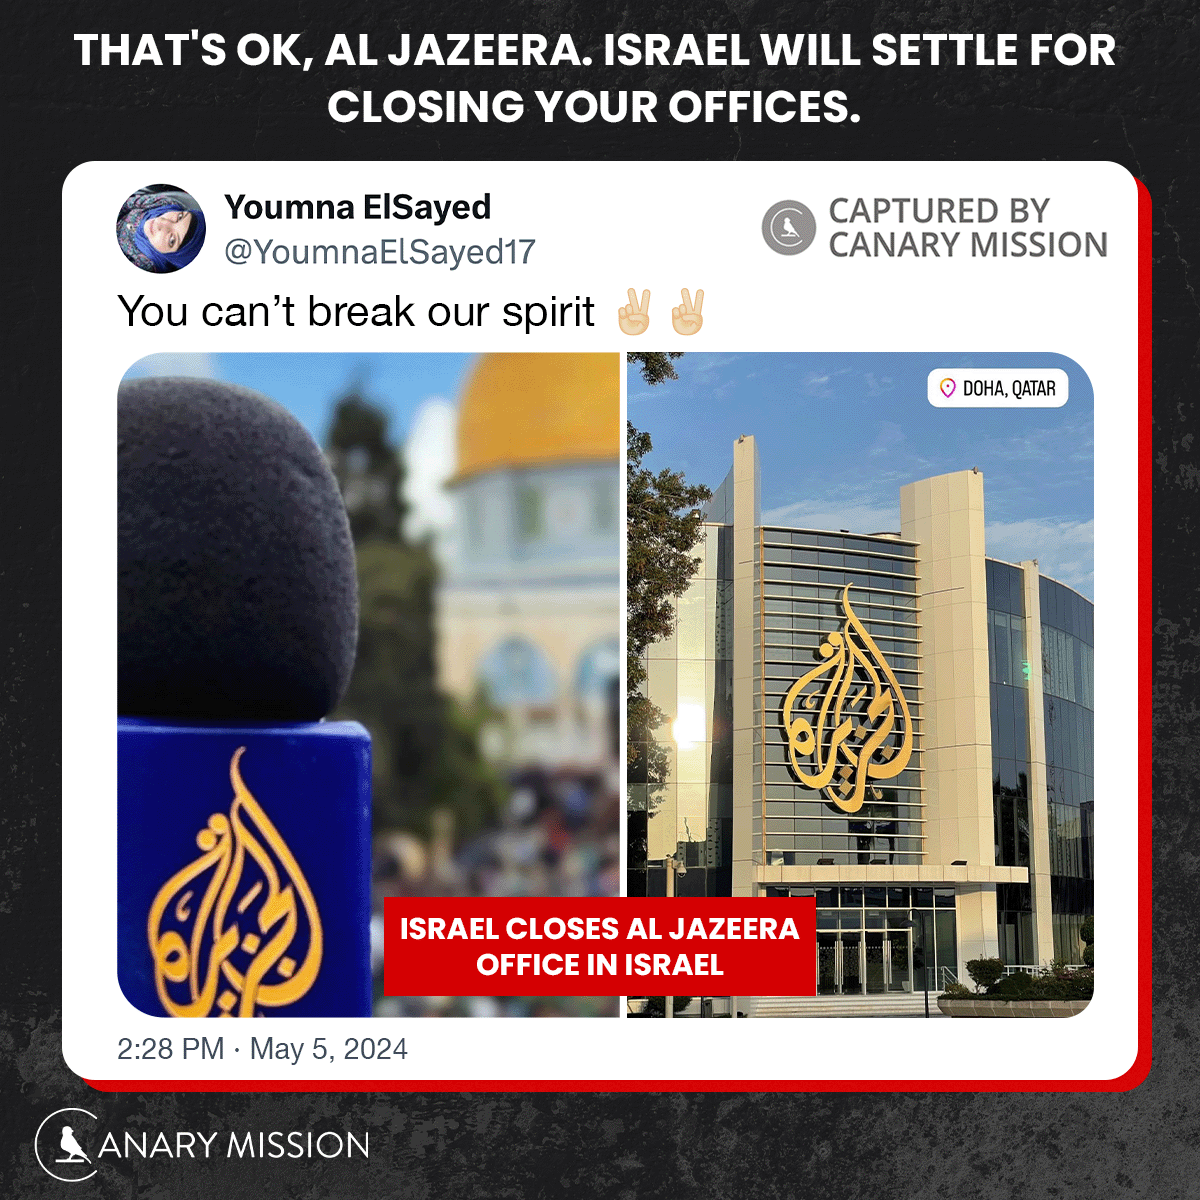 That's ok, @AlJazeera. Israel will settle for closing your offices. Boo hoo, you can't broadcast your antisemitic propaganda from Israel anymore. canarymission.org/organization/A…